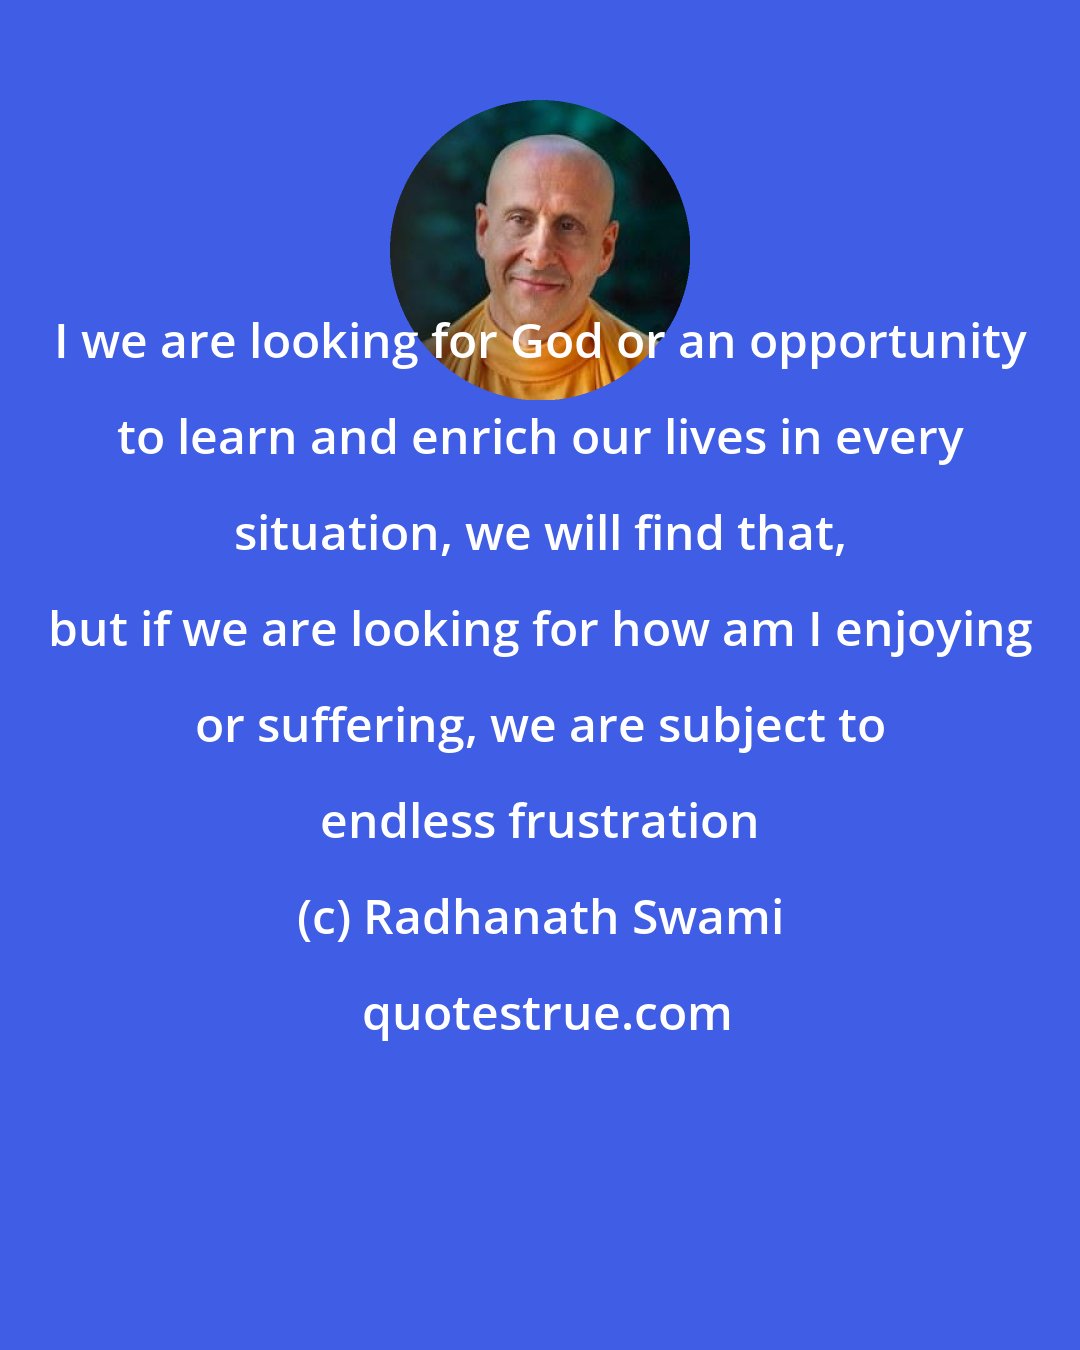 Radhanath Swami: I we are looking for God or an opportunity to learn and enrich our lives in every situation, we will find that, but if we are looking for how am I enjoying or suffering, we are subject to endless frustration